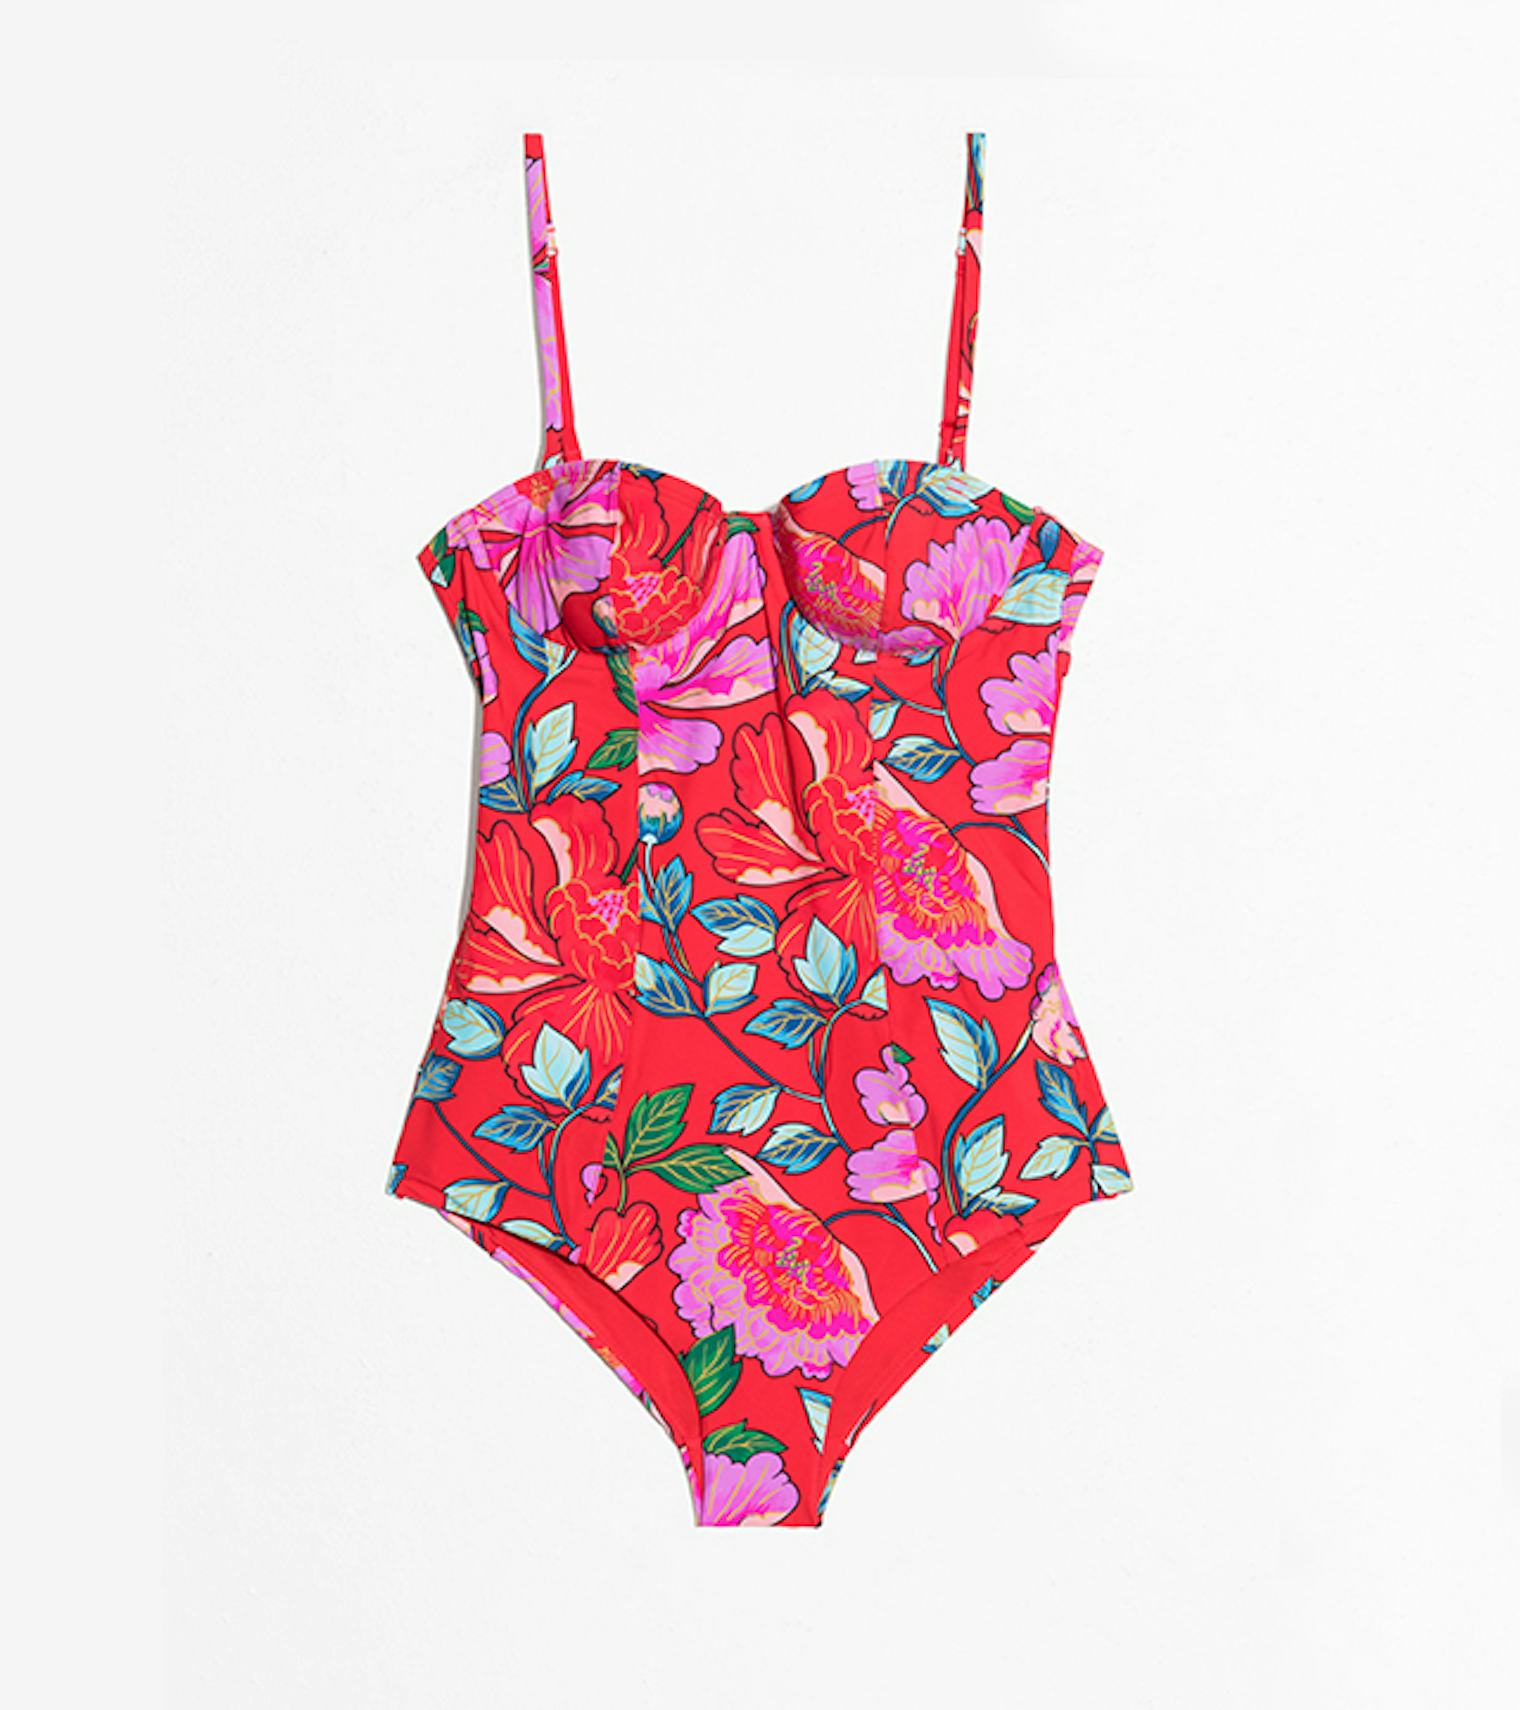 15 Retro-Inspired Swimsuits To Dive Into This Summer